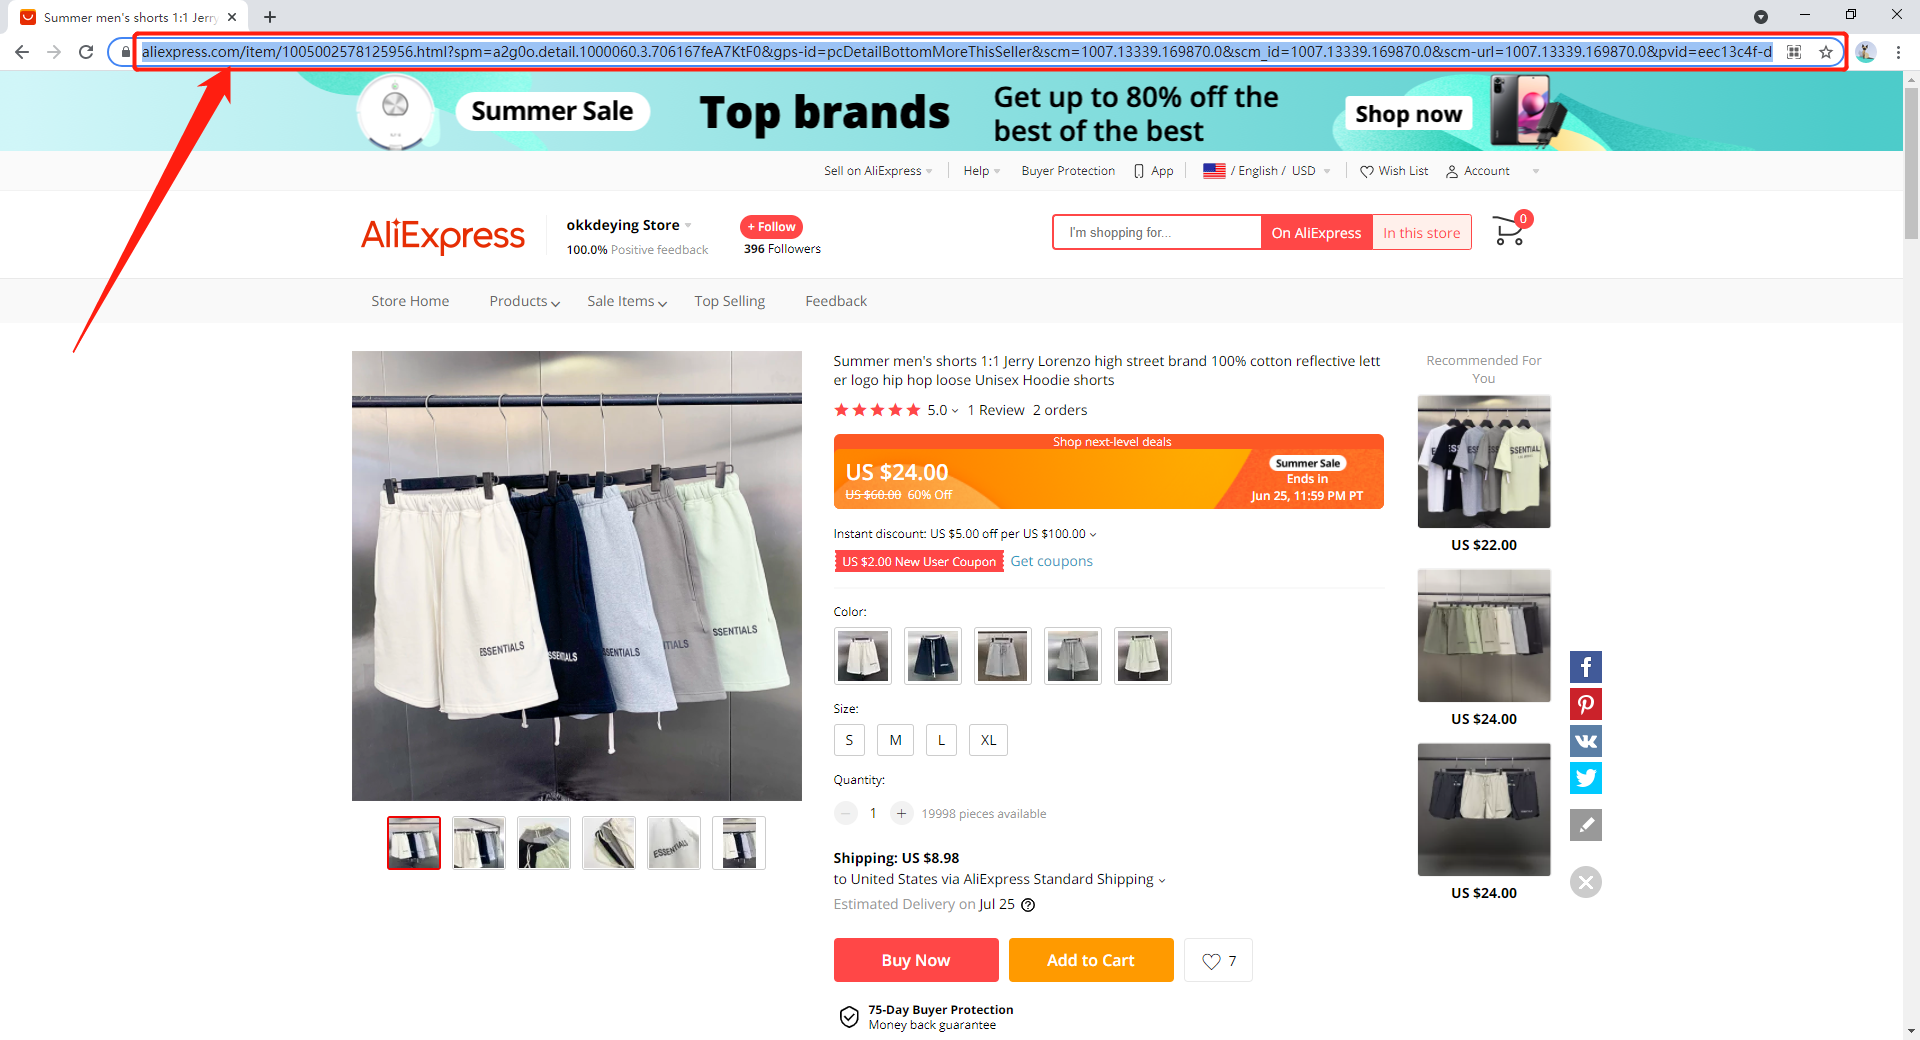 Replacing with a new supplier - Copy the URL from AliExpress - Wix DSers